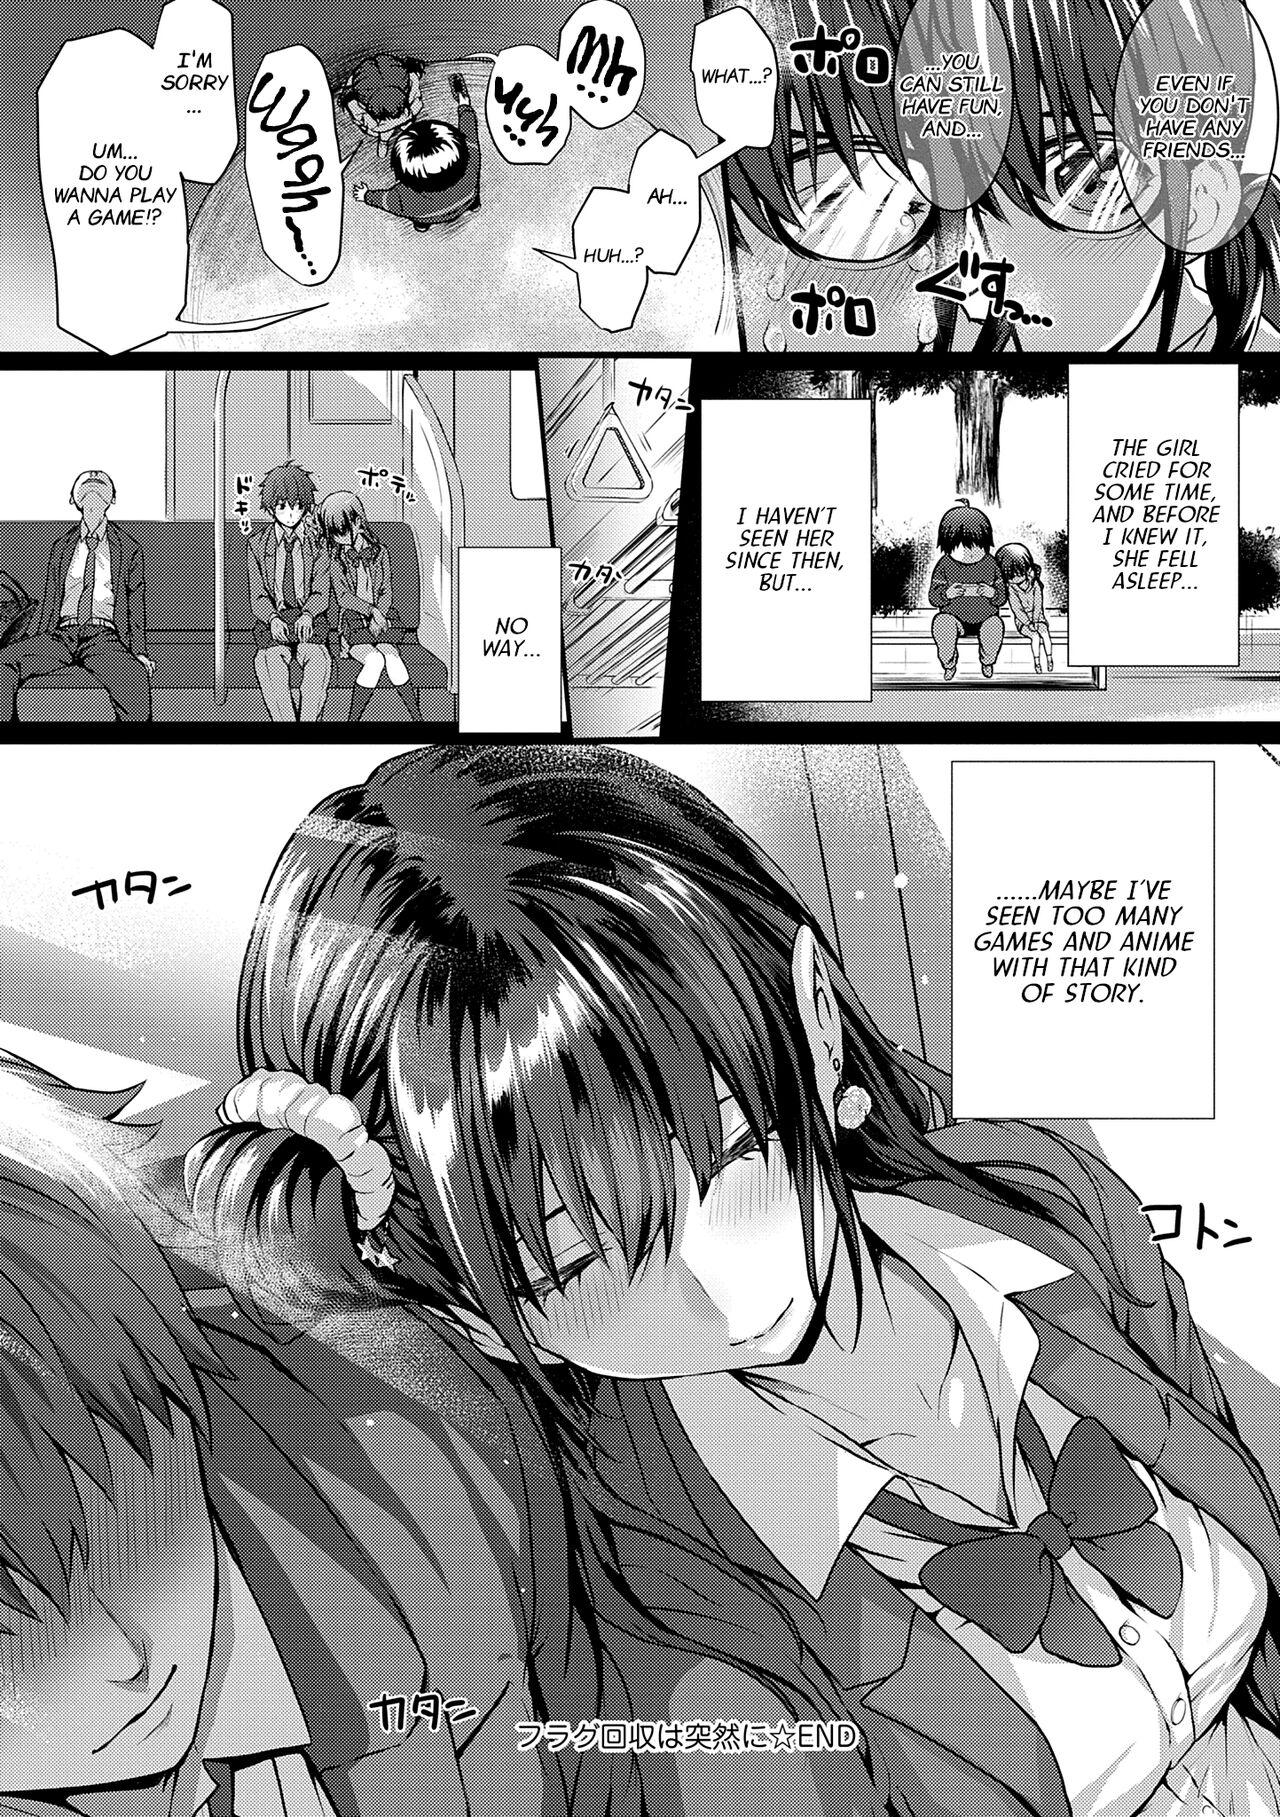 Selfie Flag Kaishuu wa Totsuzen ni | The Puzzle Pieces Are Suddenly Coming Together Amatuer - Page 30